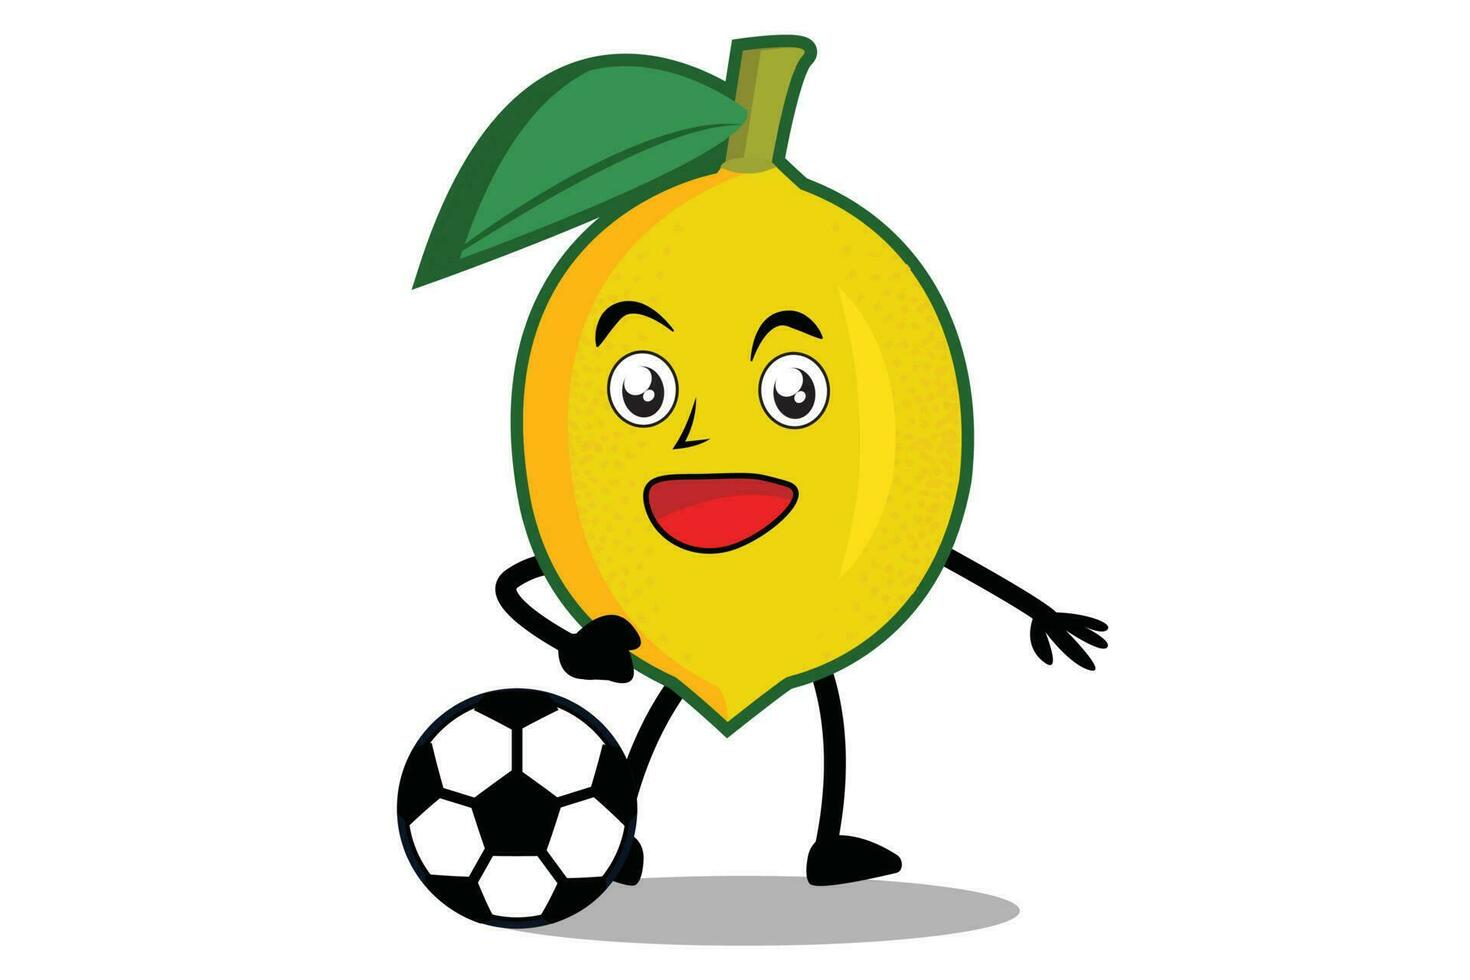 Lemon Cartoon mascot or character plays soccer and becomes the mascot for his soccer team vector